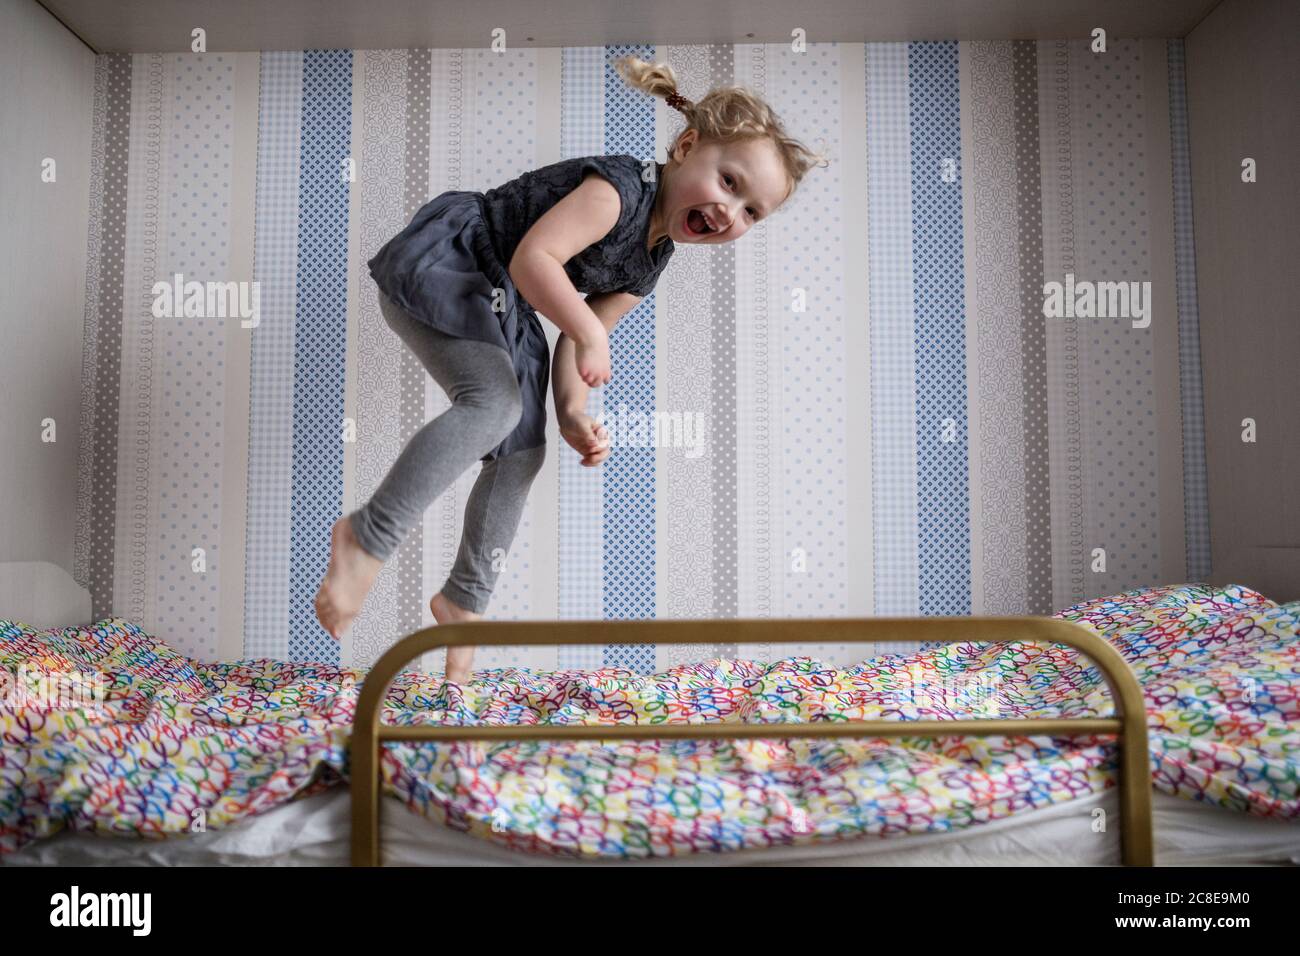 Cheerful girl jumping on bunkbed at home Stock Photo